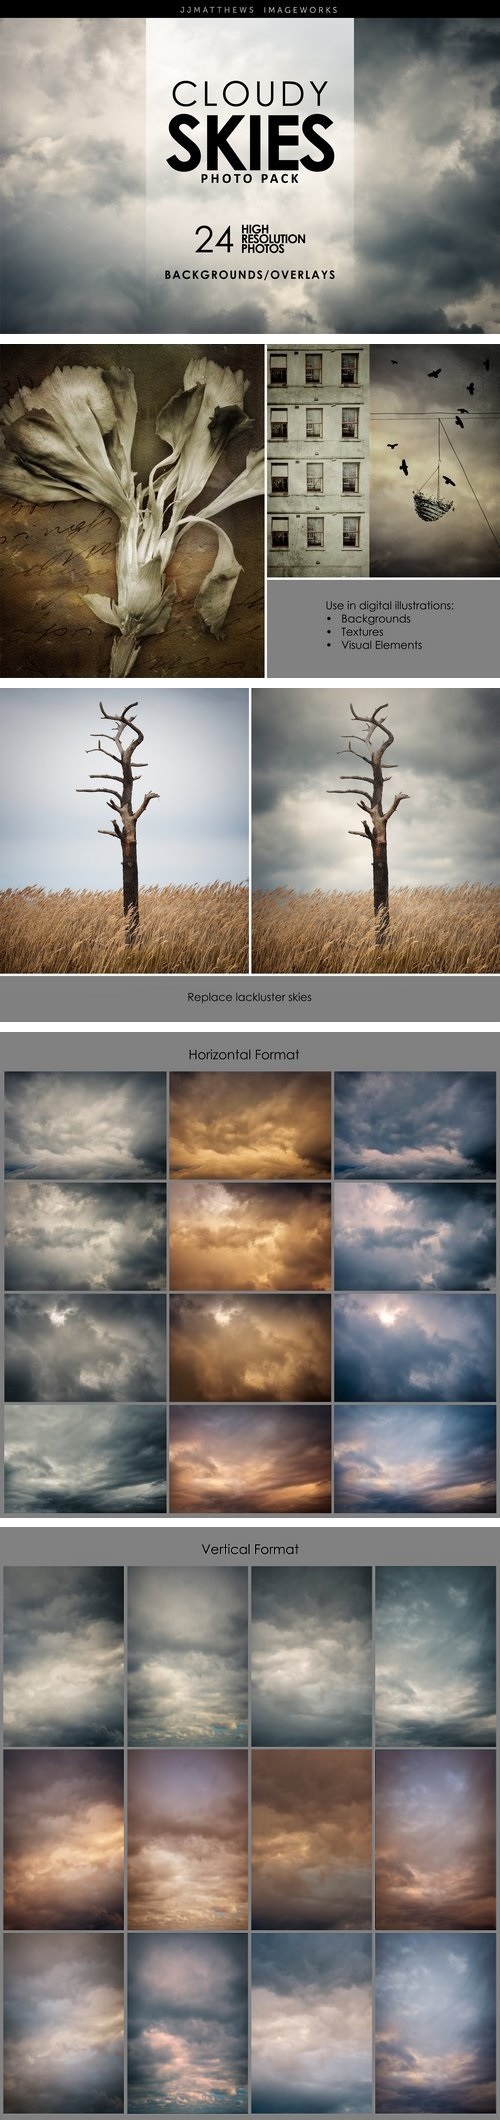 Cloudy Skies-Backgrounds & Overlays - 2083980